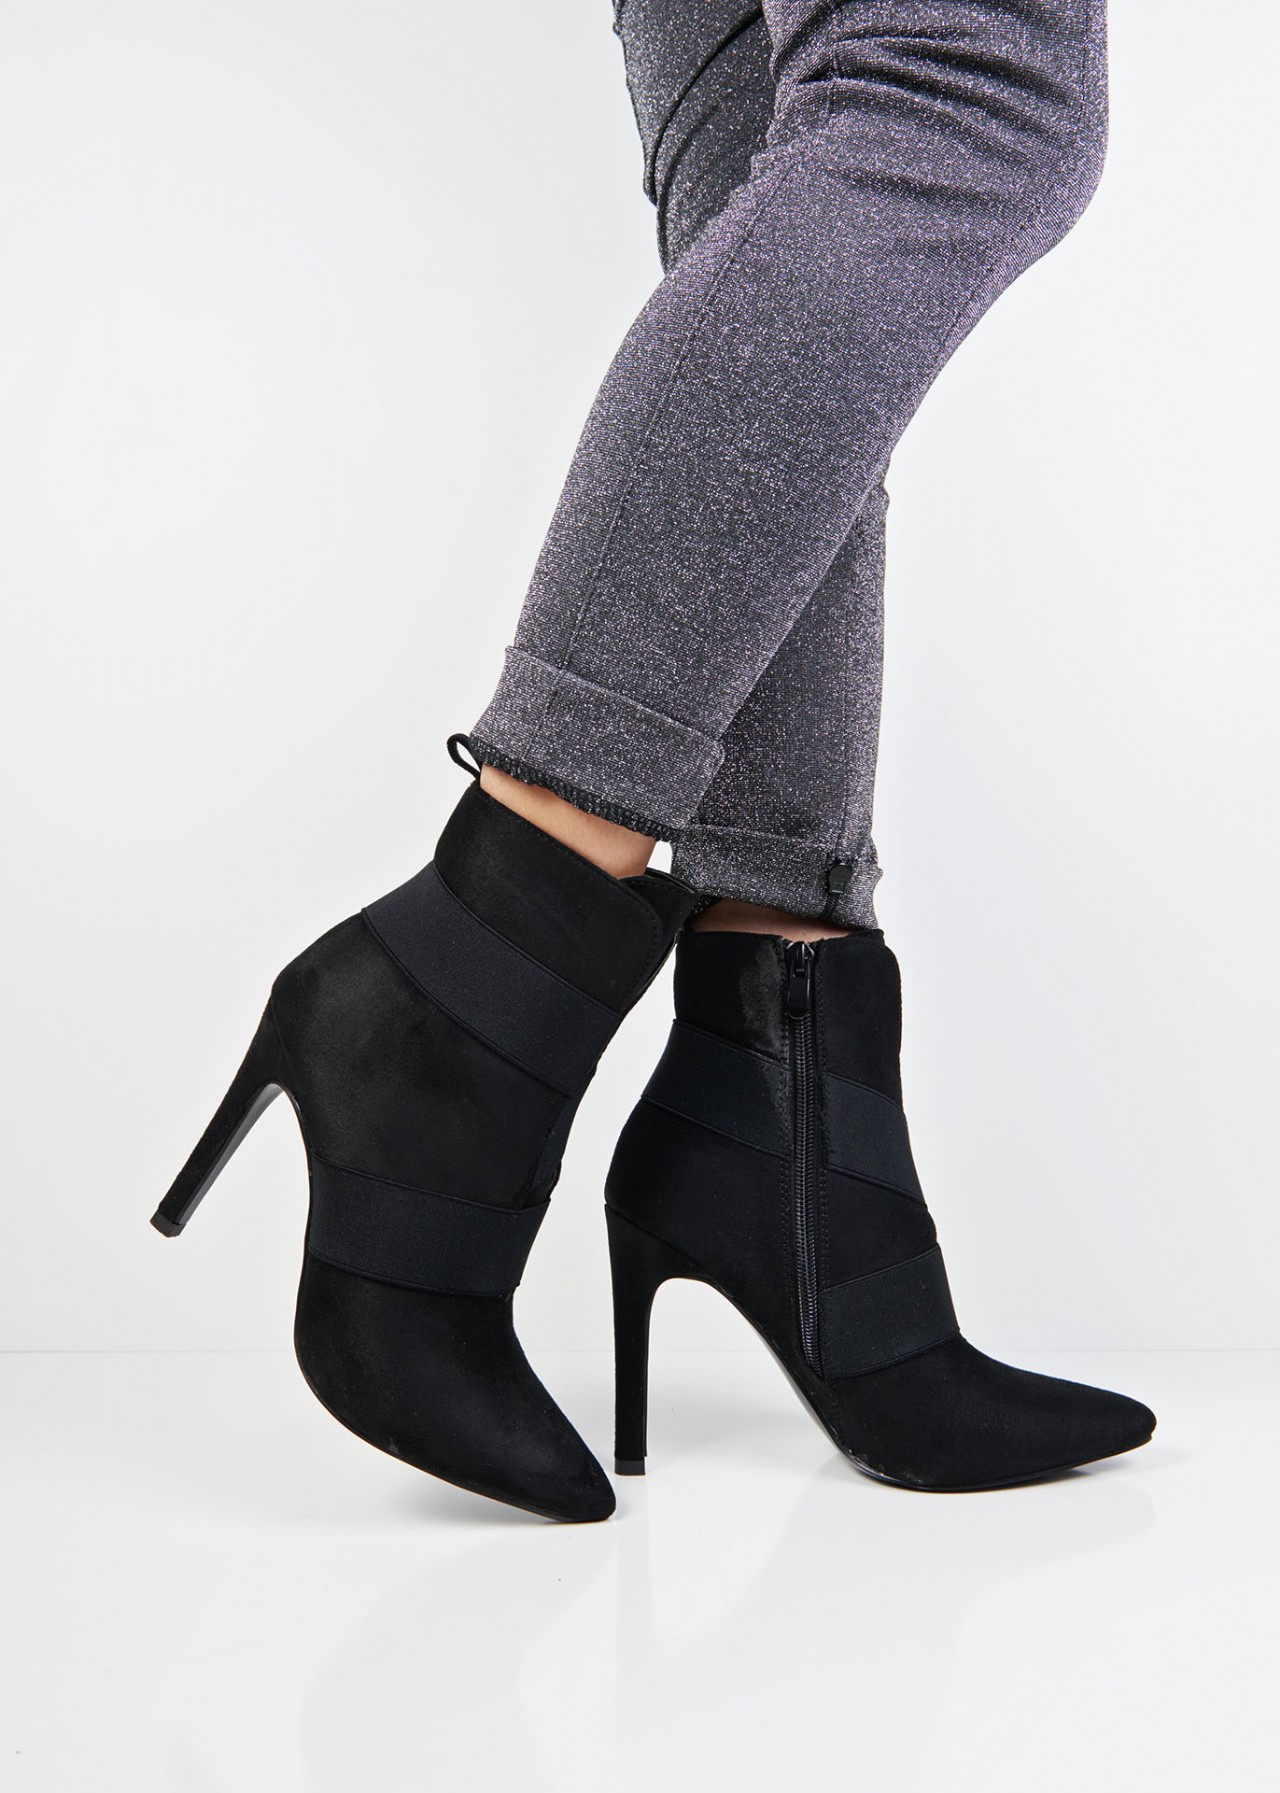 Black pointed high heel ankle boots for women